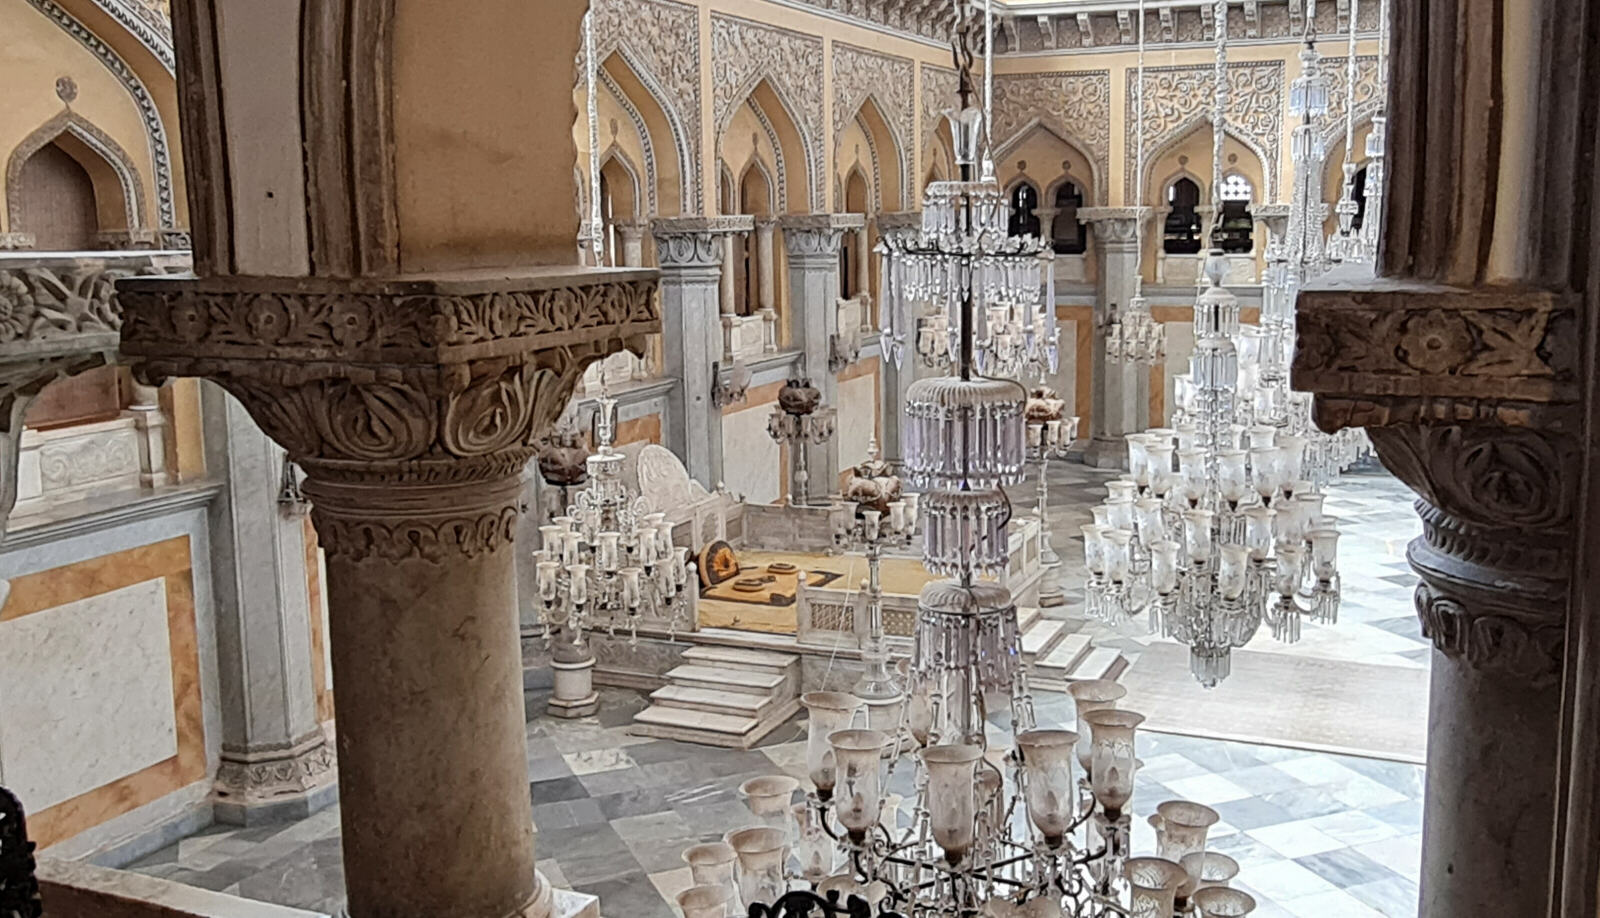 Throne room in the Chowmahalla palace, Hyderabad